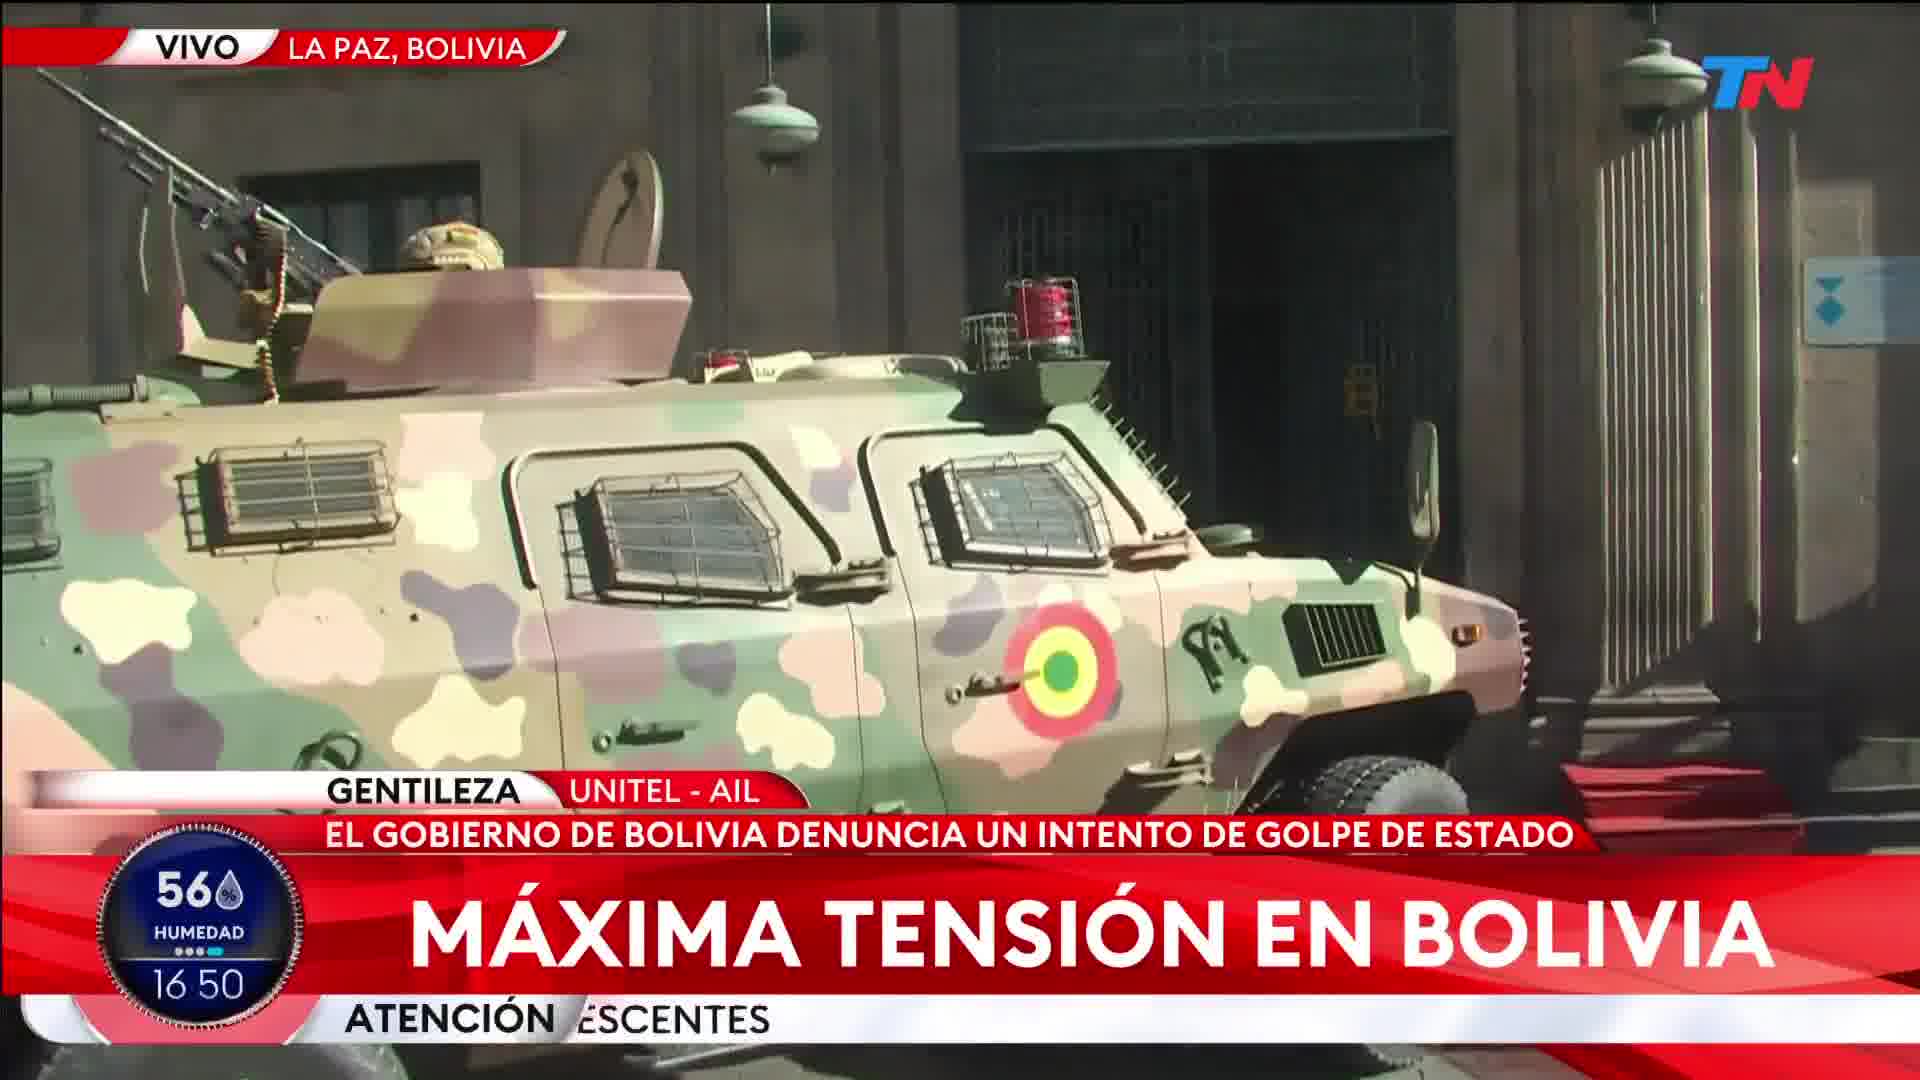 Bolivian military armoured vehicle breaks down the doors of the Palacio Quemado (former presidential residence) in La Paz and soldiers enter to secure the building